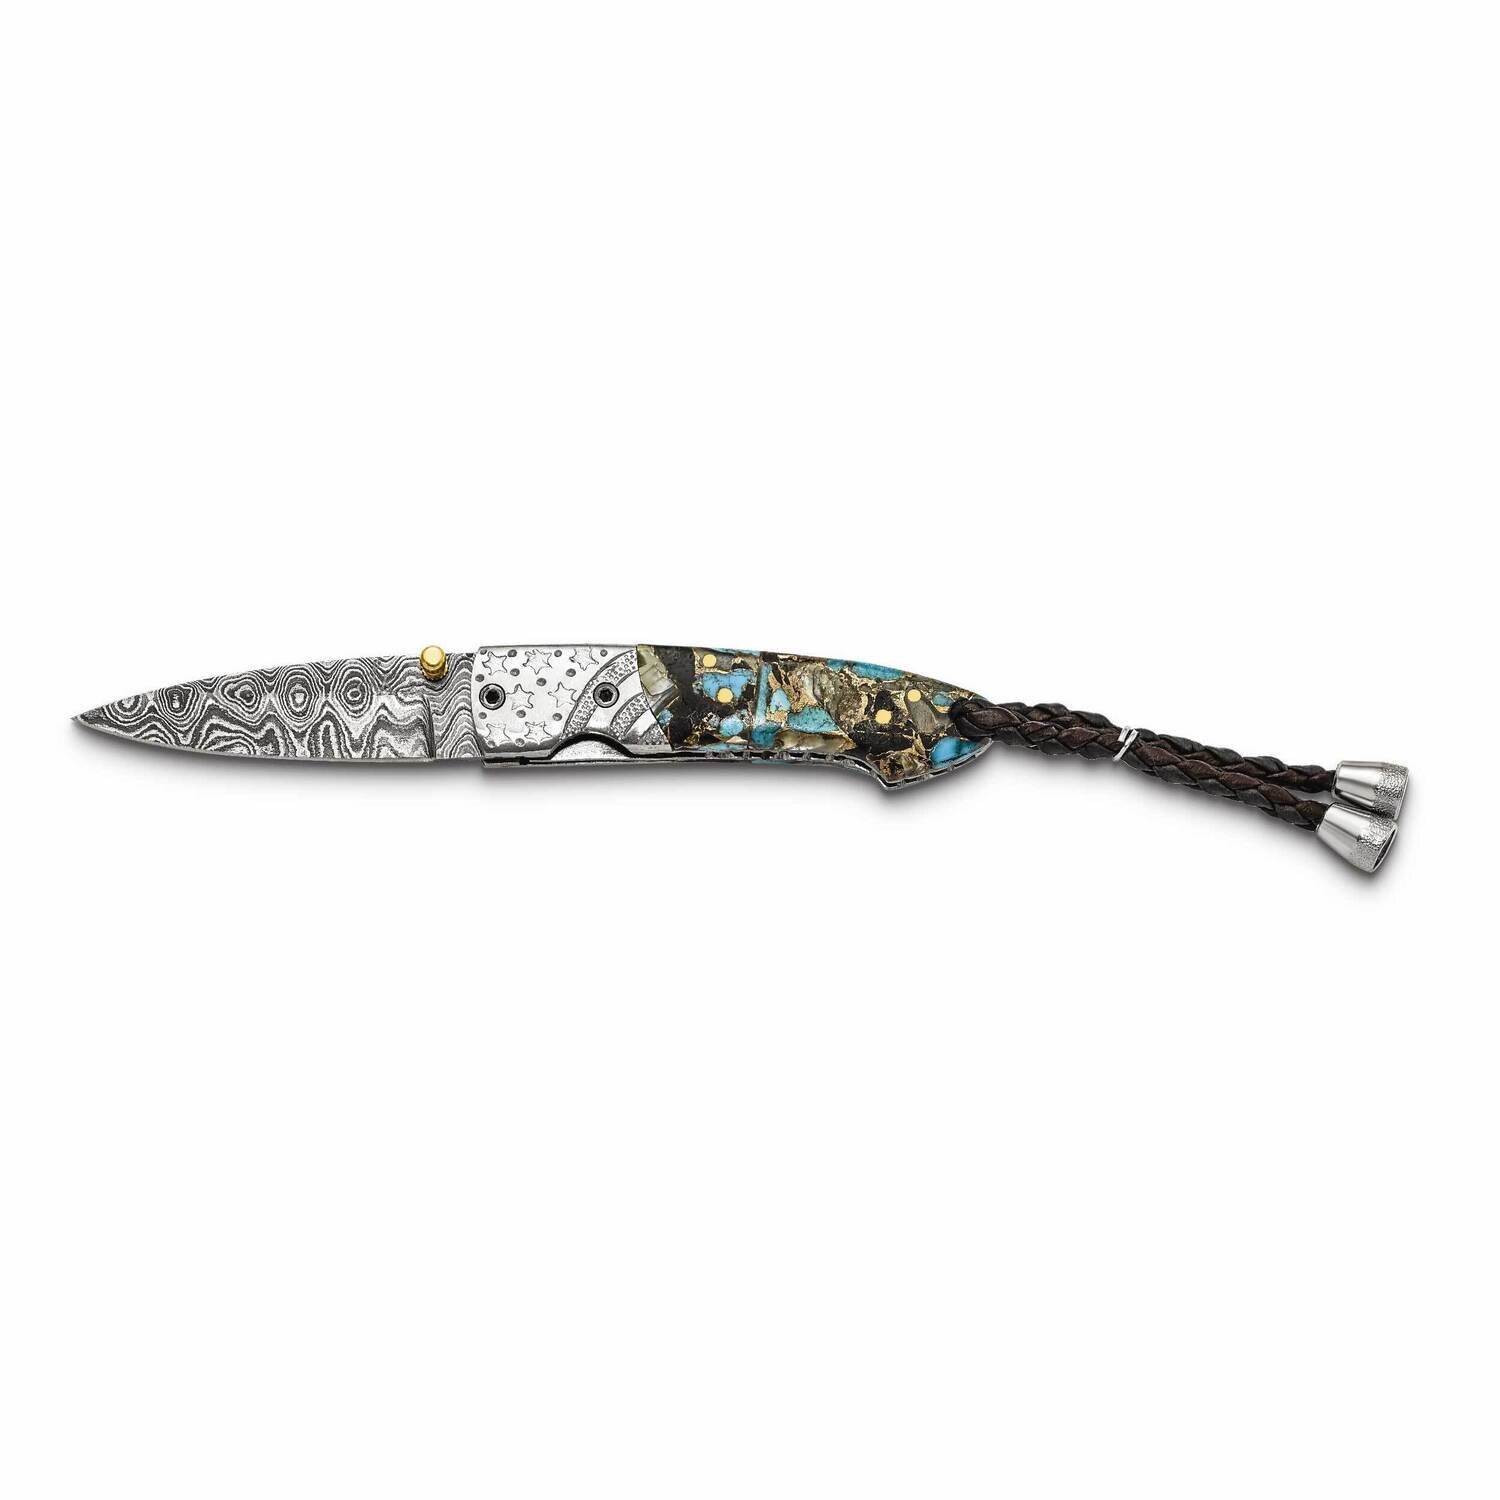 By Jere Folding Blade Turquoise/Abalone/Obsidian/Bronze Handle Knife with Leather Sheath and Wooden Gift Box Damascus Steel 256 Layer KN3257